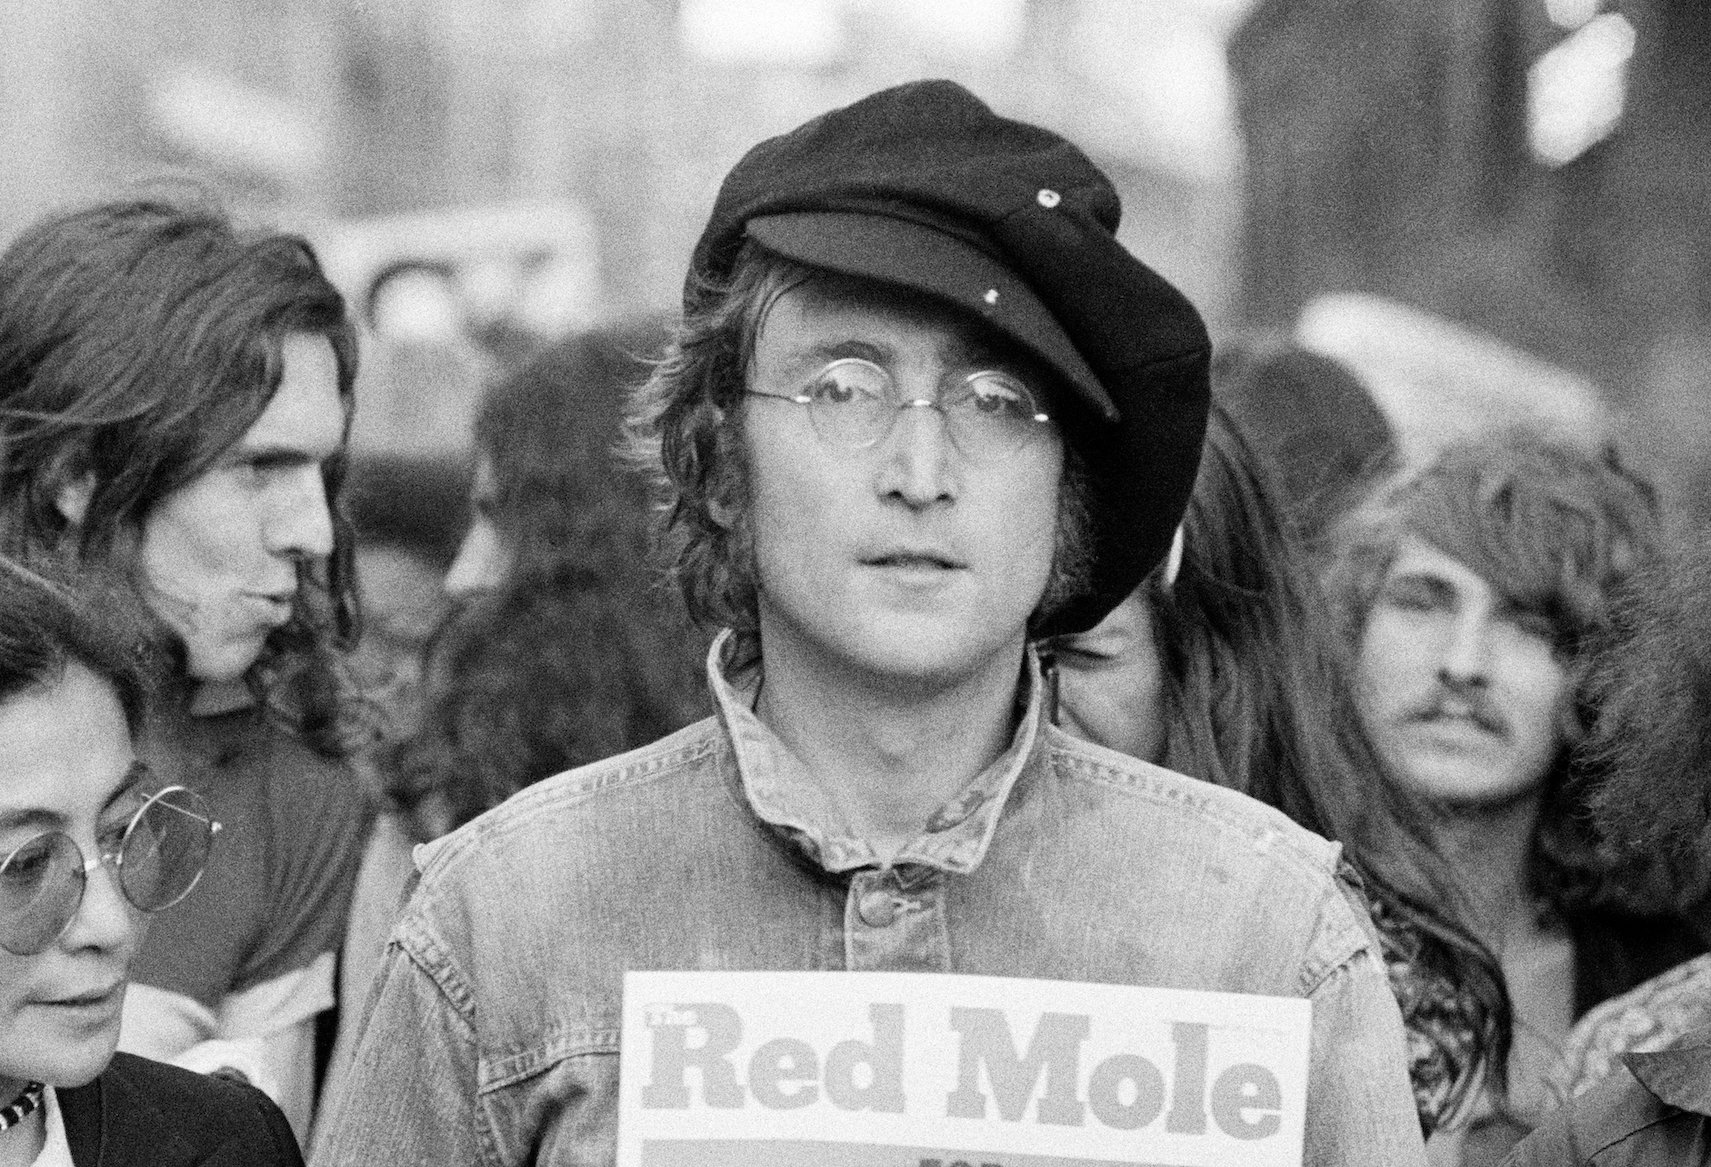 John Lennon and Yoko Ono attend an unspecified rally in Hyde Park